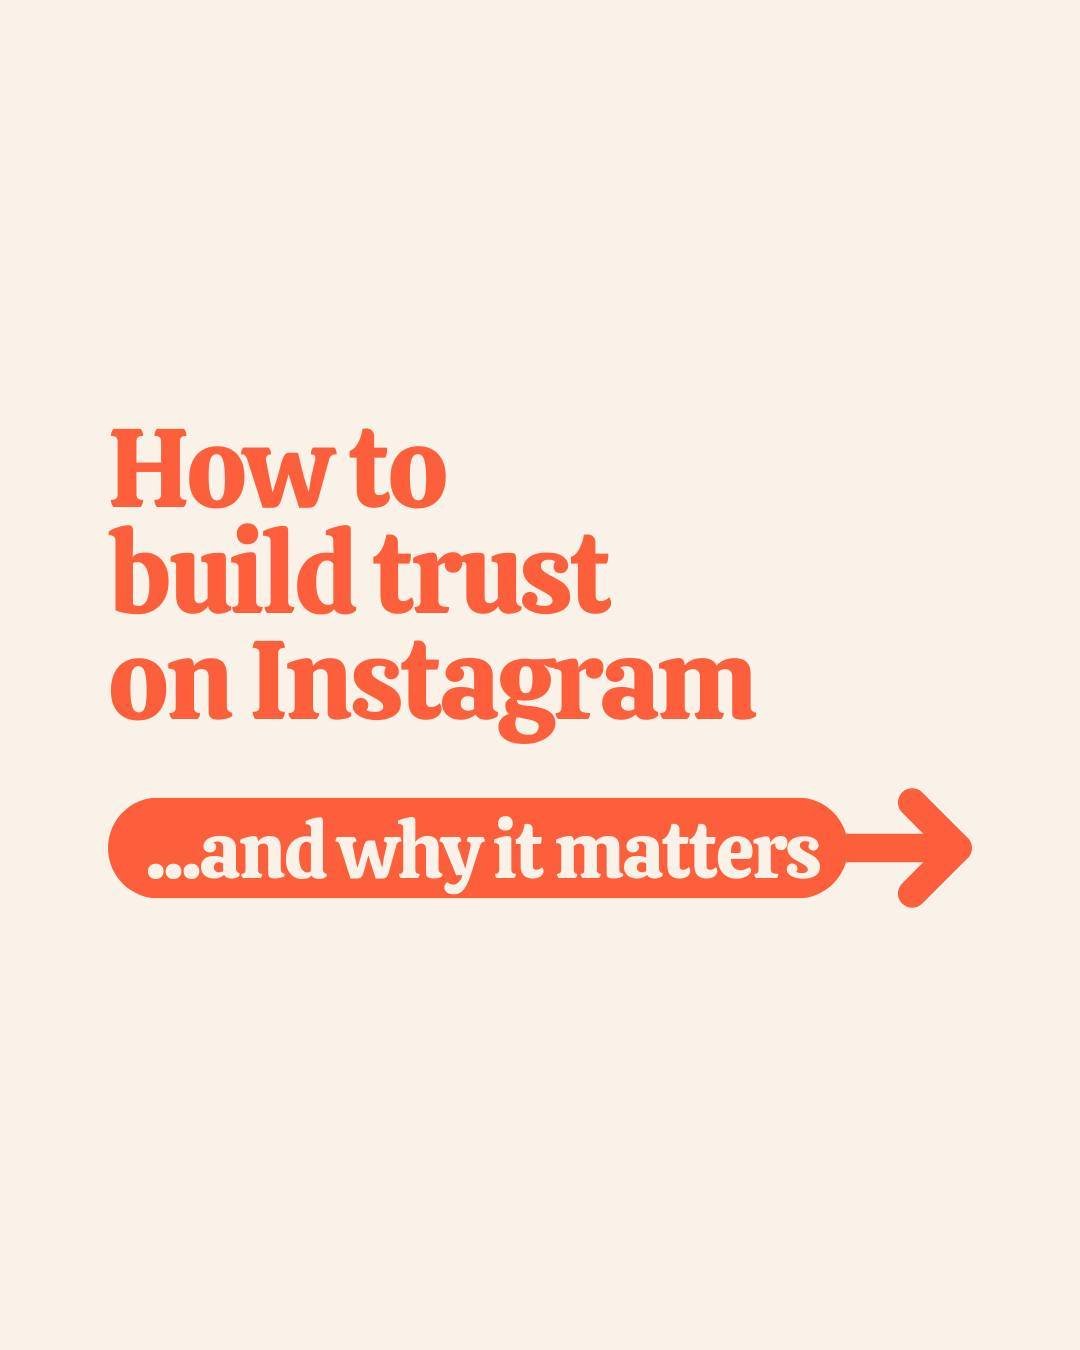 Go from shifty to sound 👇

Using your social media to build trust is one of the most powerful uses for any business.

At a minimum it shows that you are not a scam.

At best it convinces people who had previously never heard of you to spend a lot of